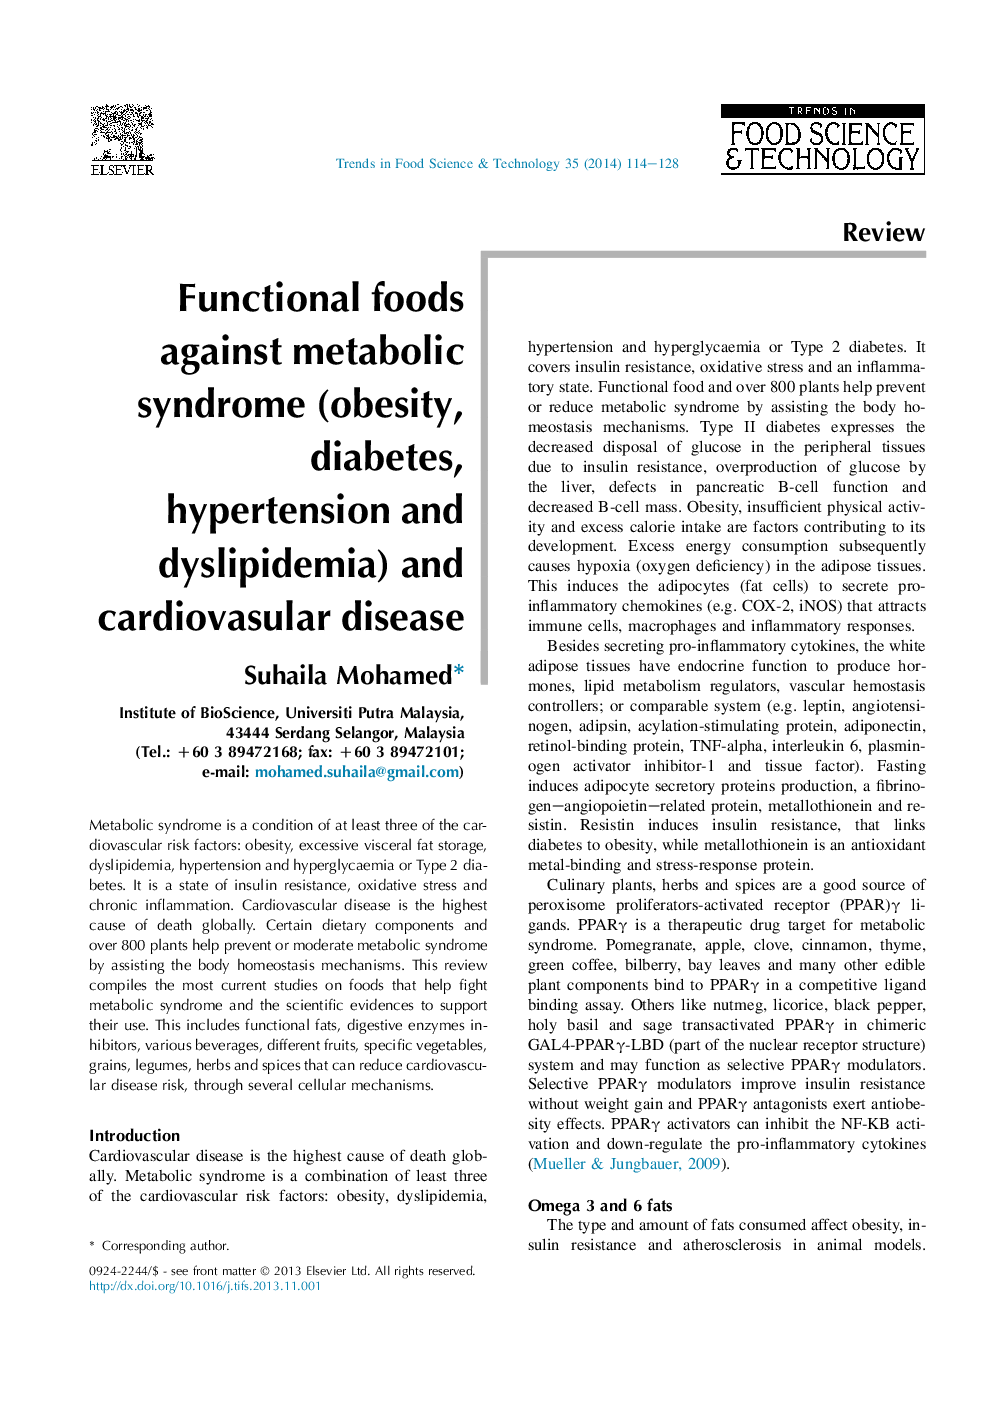 Functional foods against metabolic syndrome (obesity, diabetes, hypertension and dyslipidemia) and cardiovasular disease